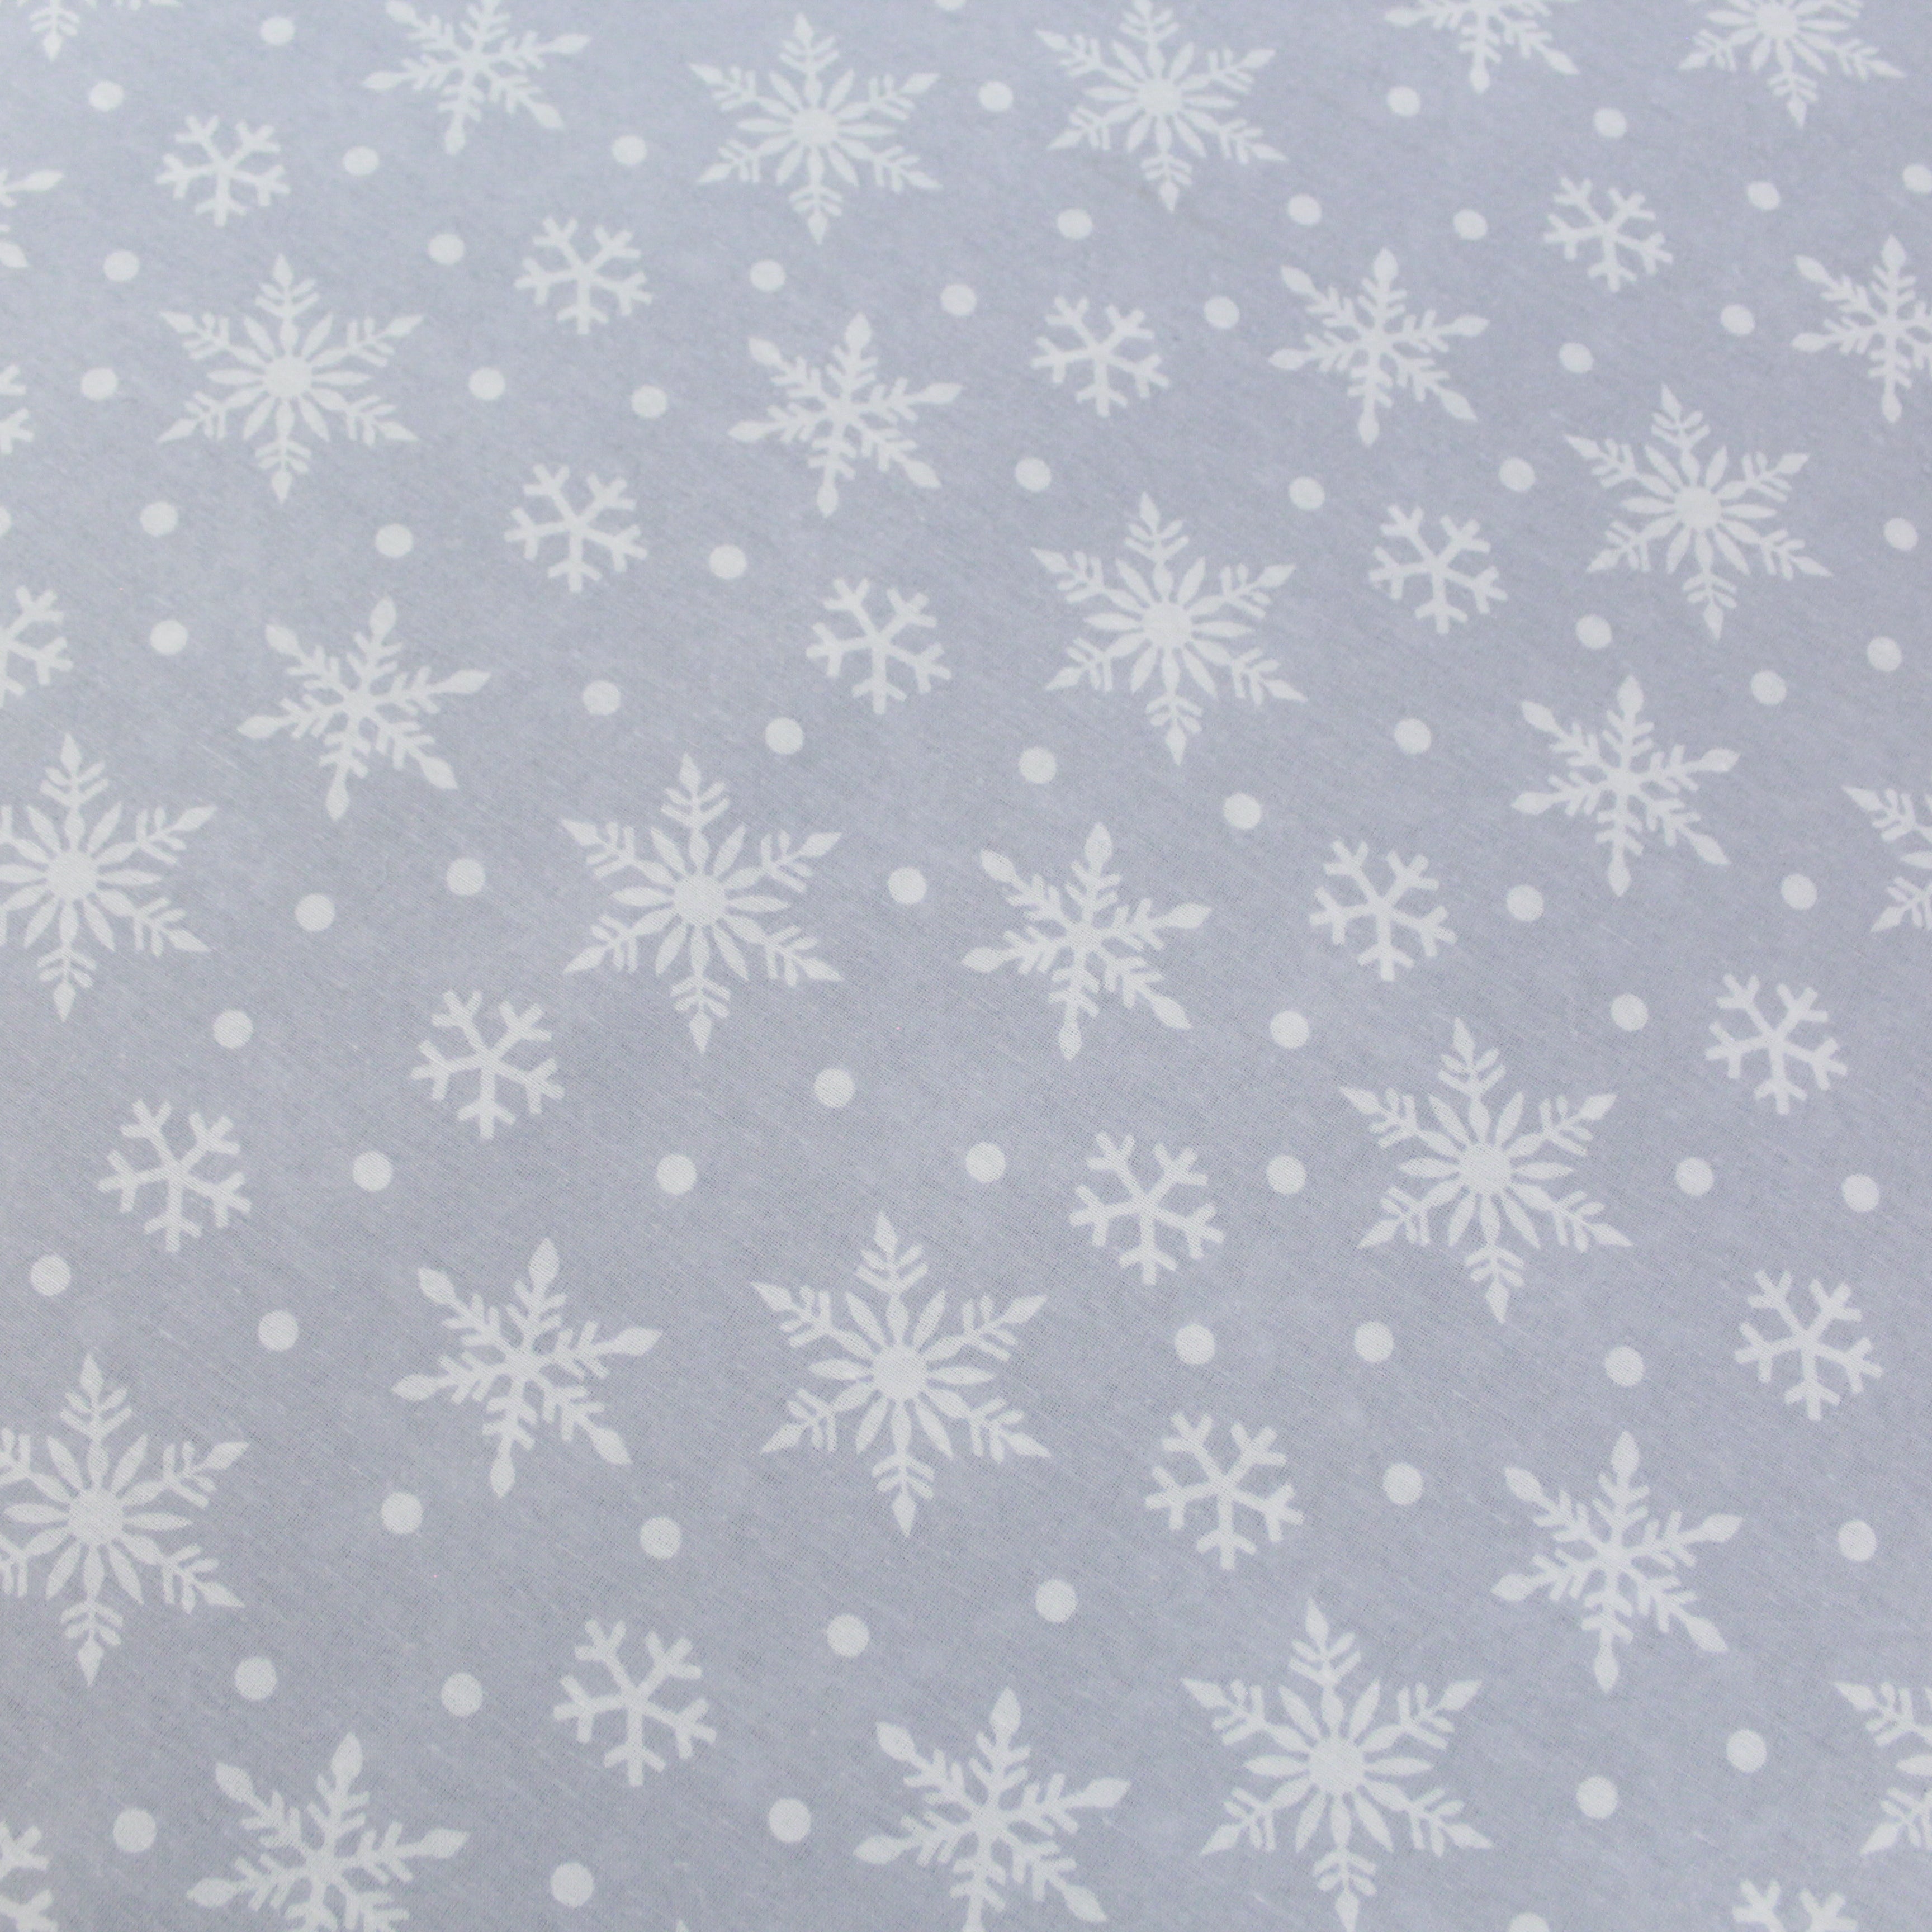 Premium Quality Super Wide Cotton Blend Sheeting "White Snowflake" 94" Wide Light Grey